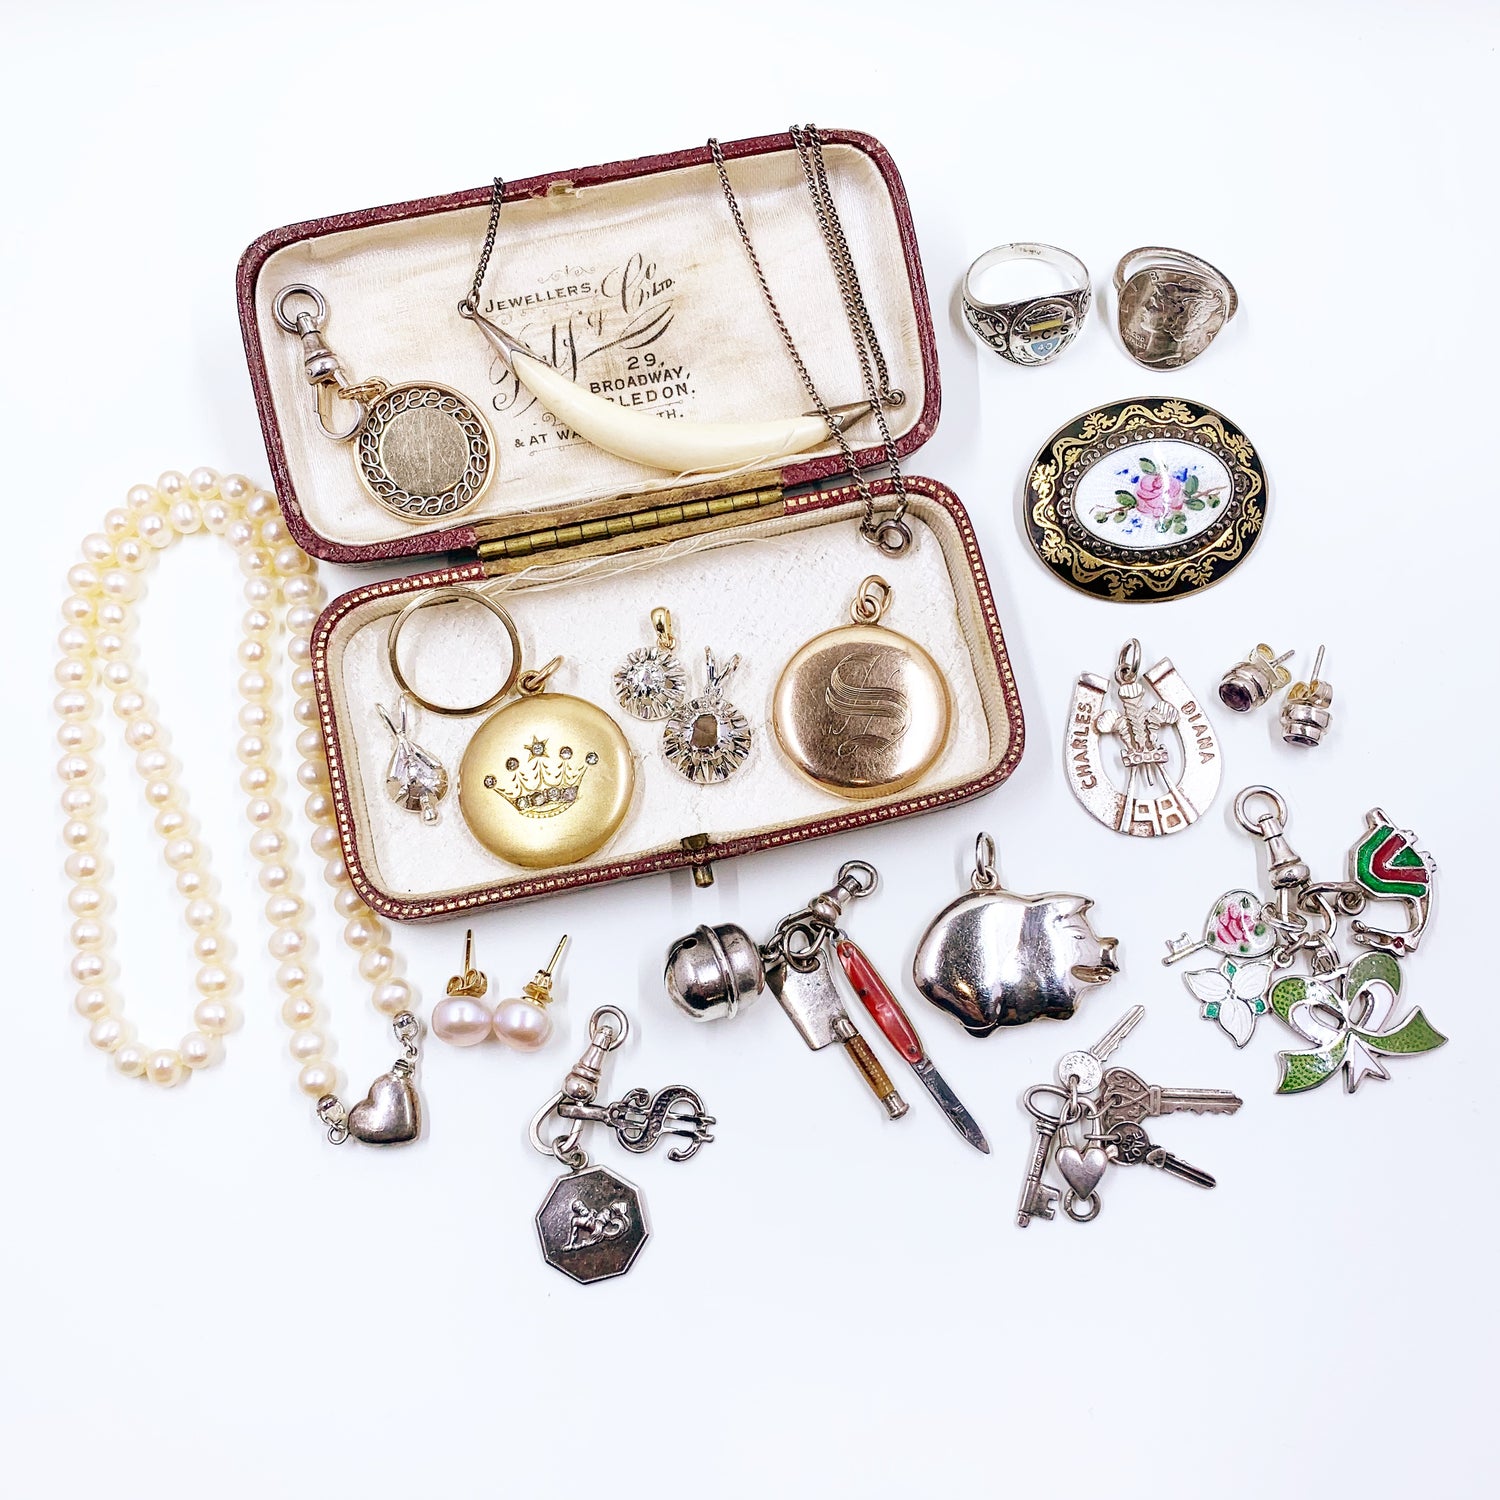 A variety of antique and vintage jewelry spread out around an antique jewelry presentation box